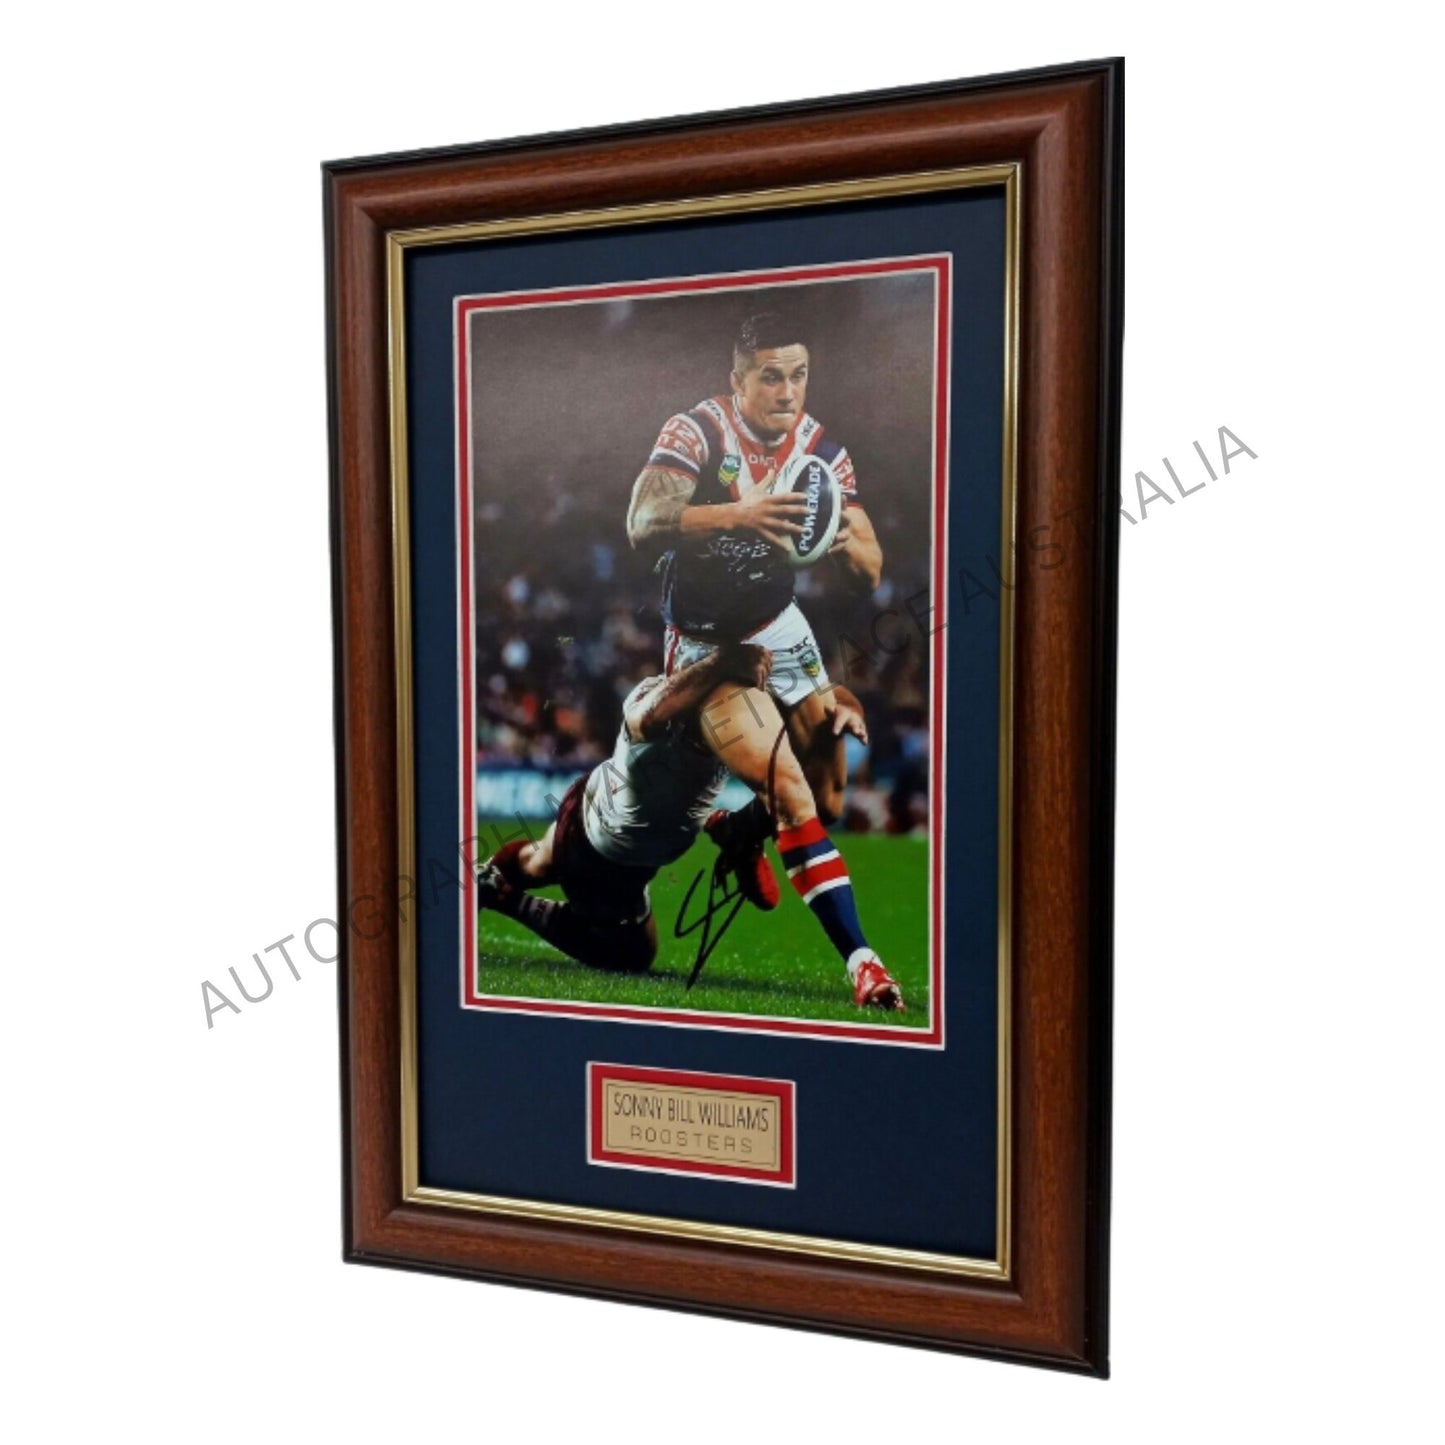 Sonny Bill Williams Sydney Roosters Signed Action Photo Framed Memorabilia